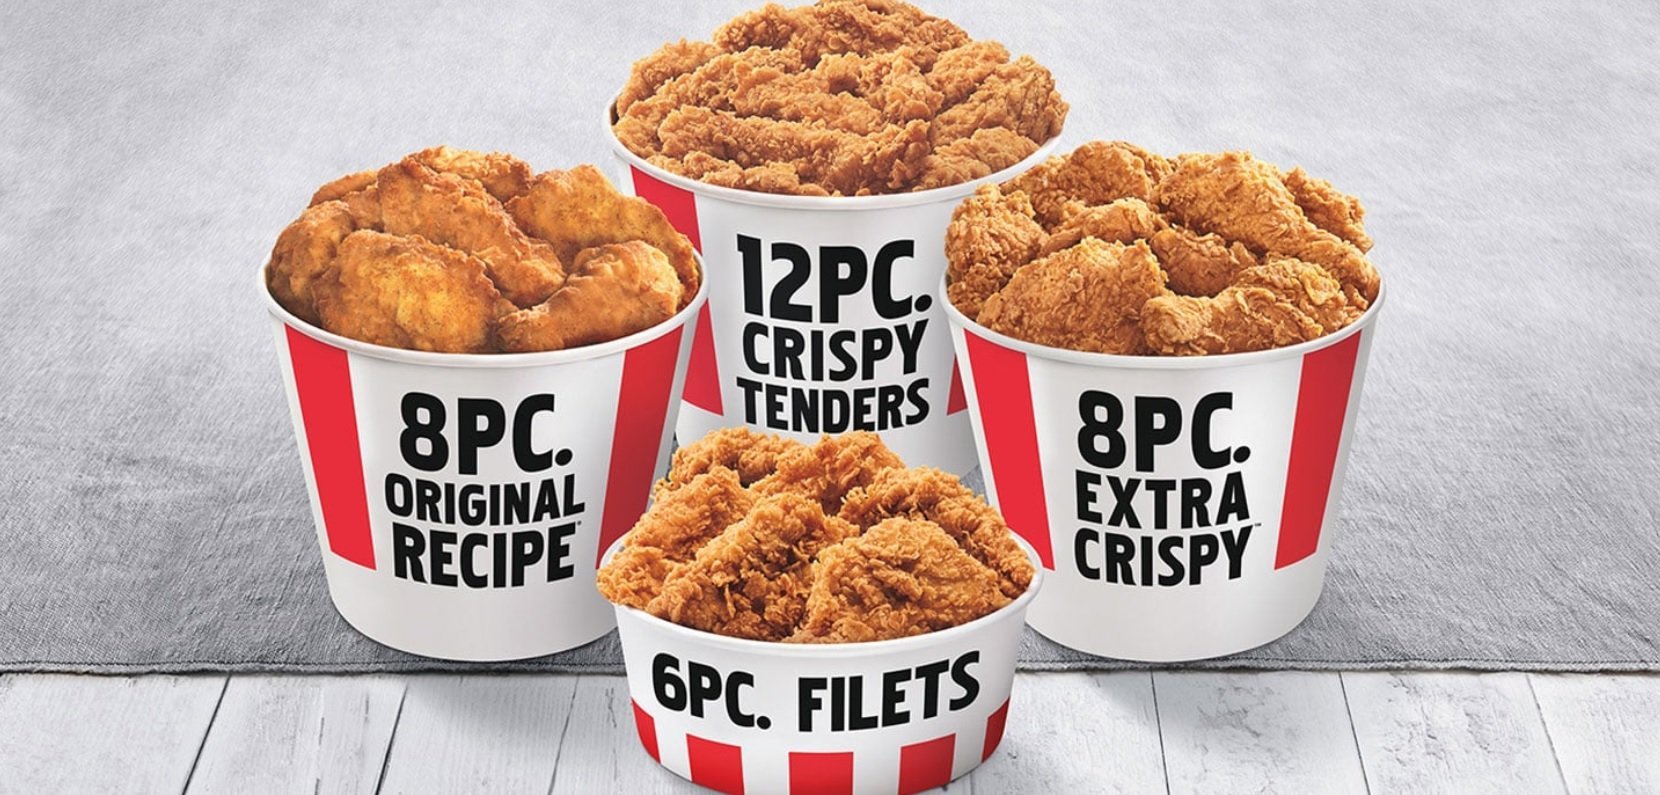 What do you get with the $20 fill up at Kentucky Fried Chicken?